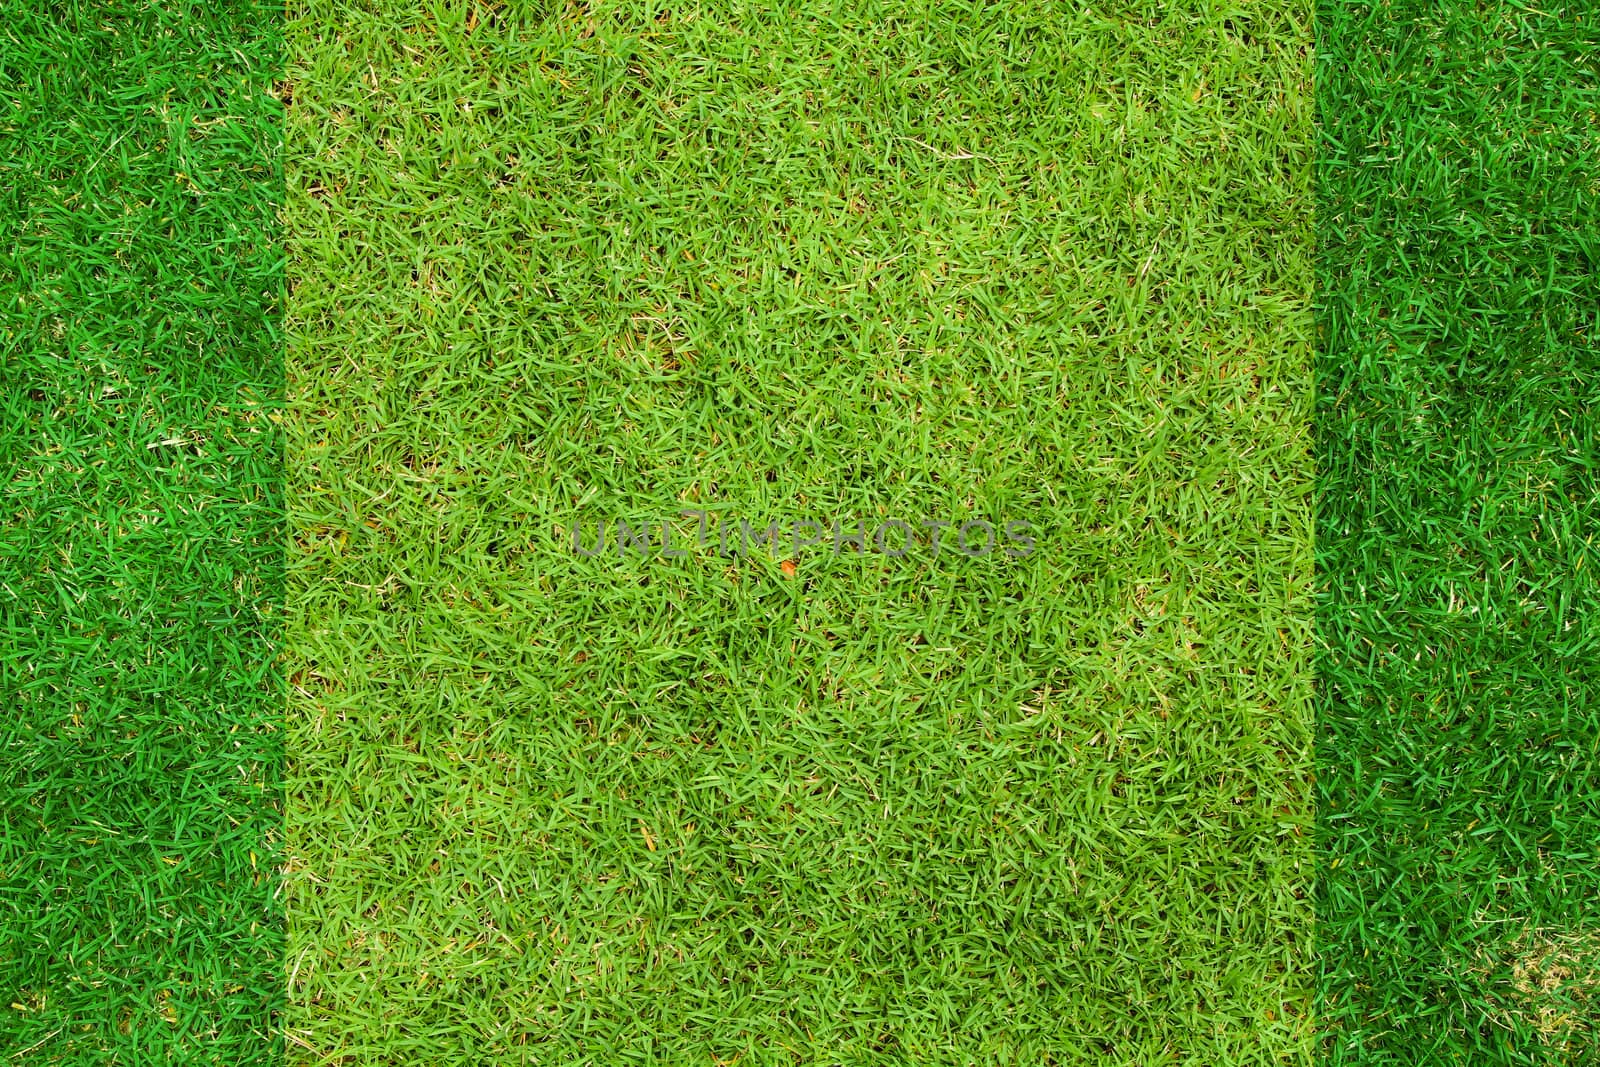 Fresh green grass top view with for background